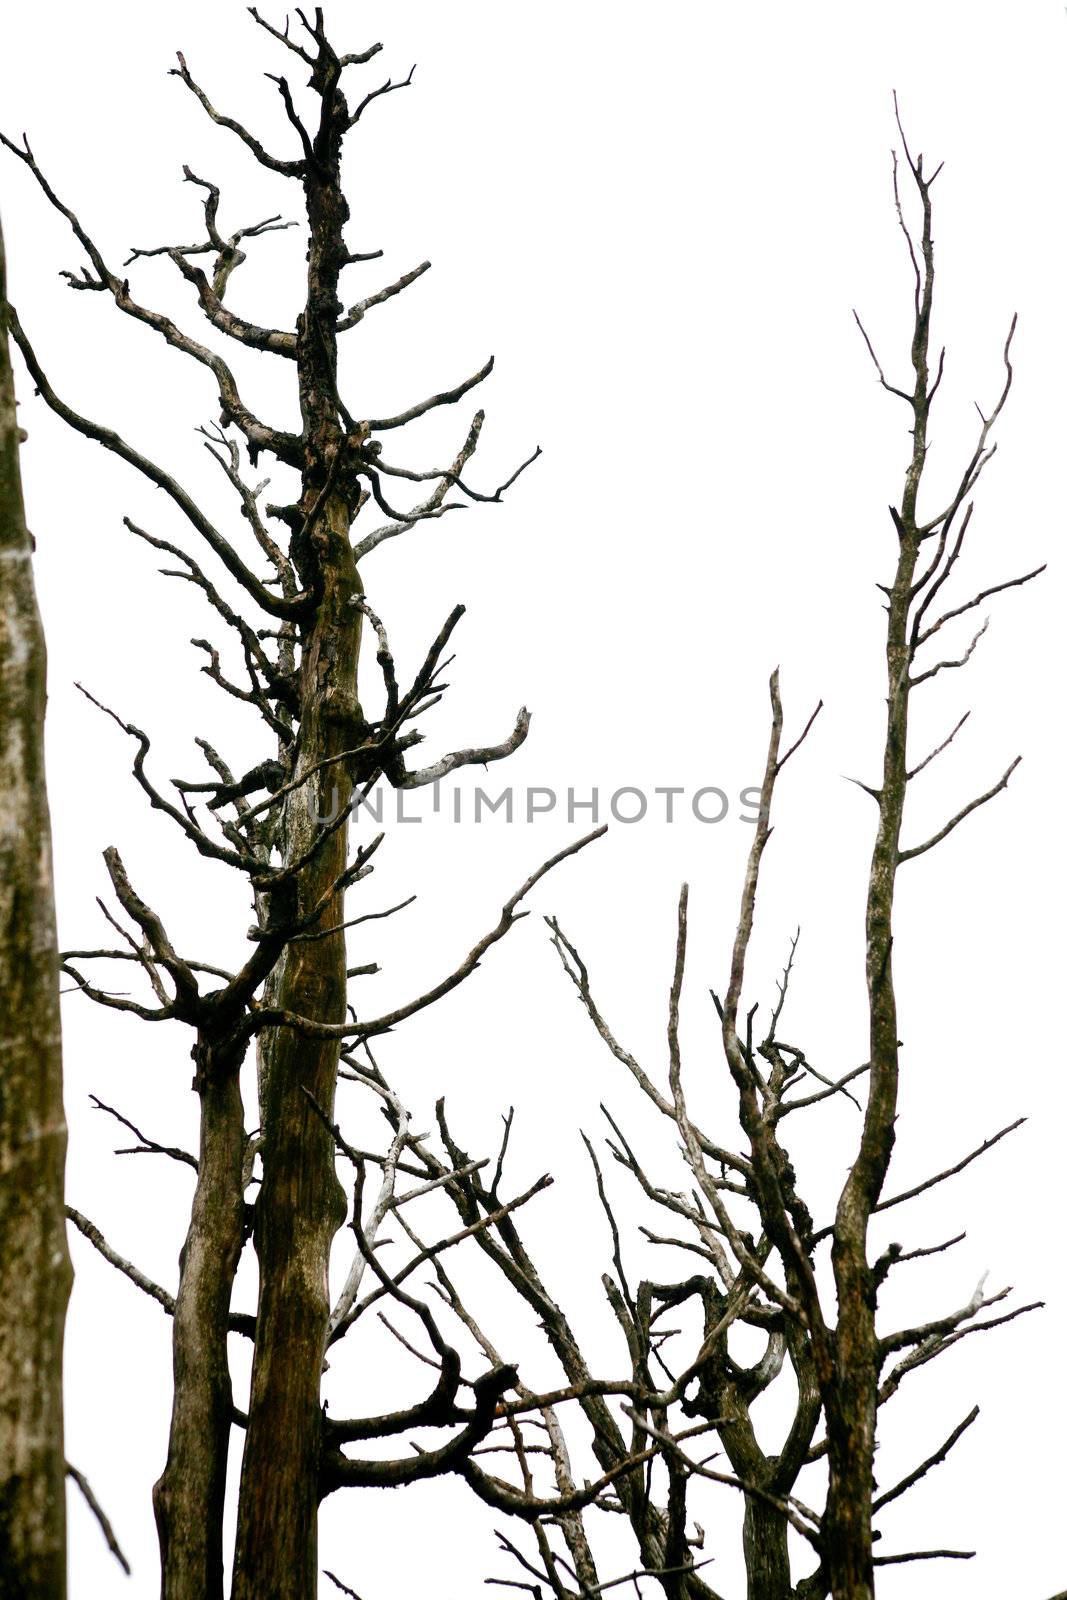 An image of old branches of trees